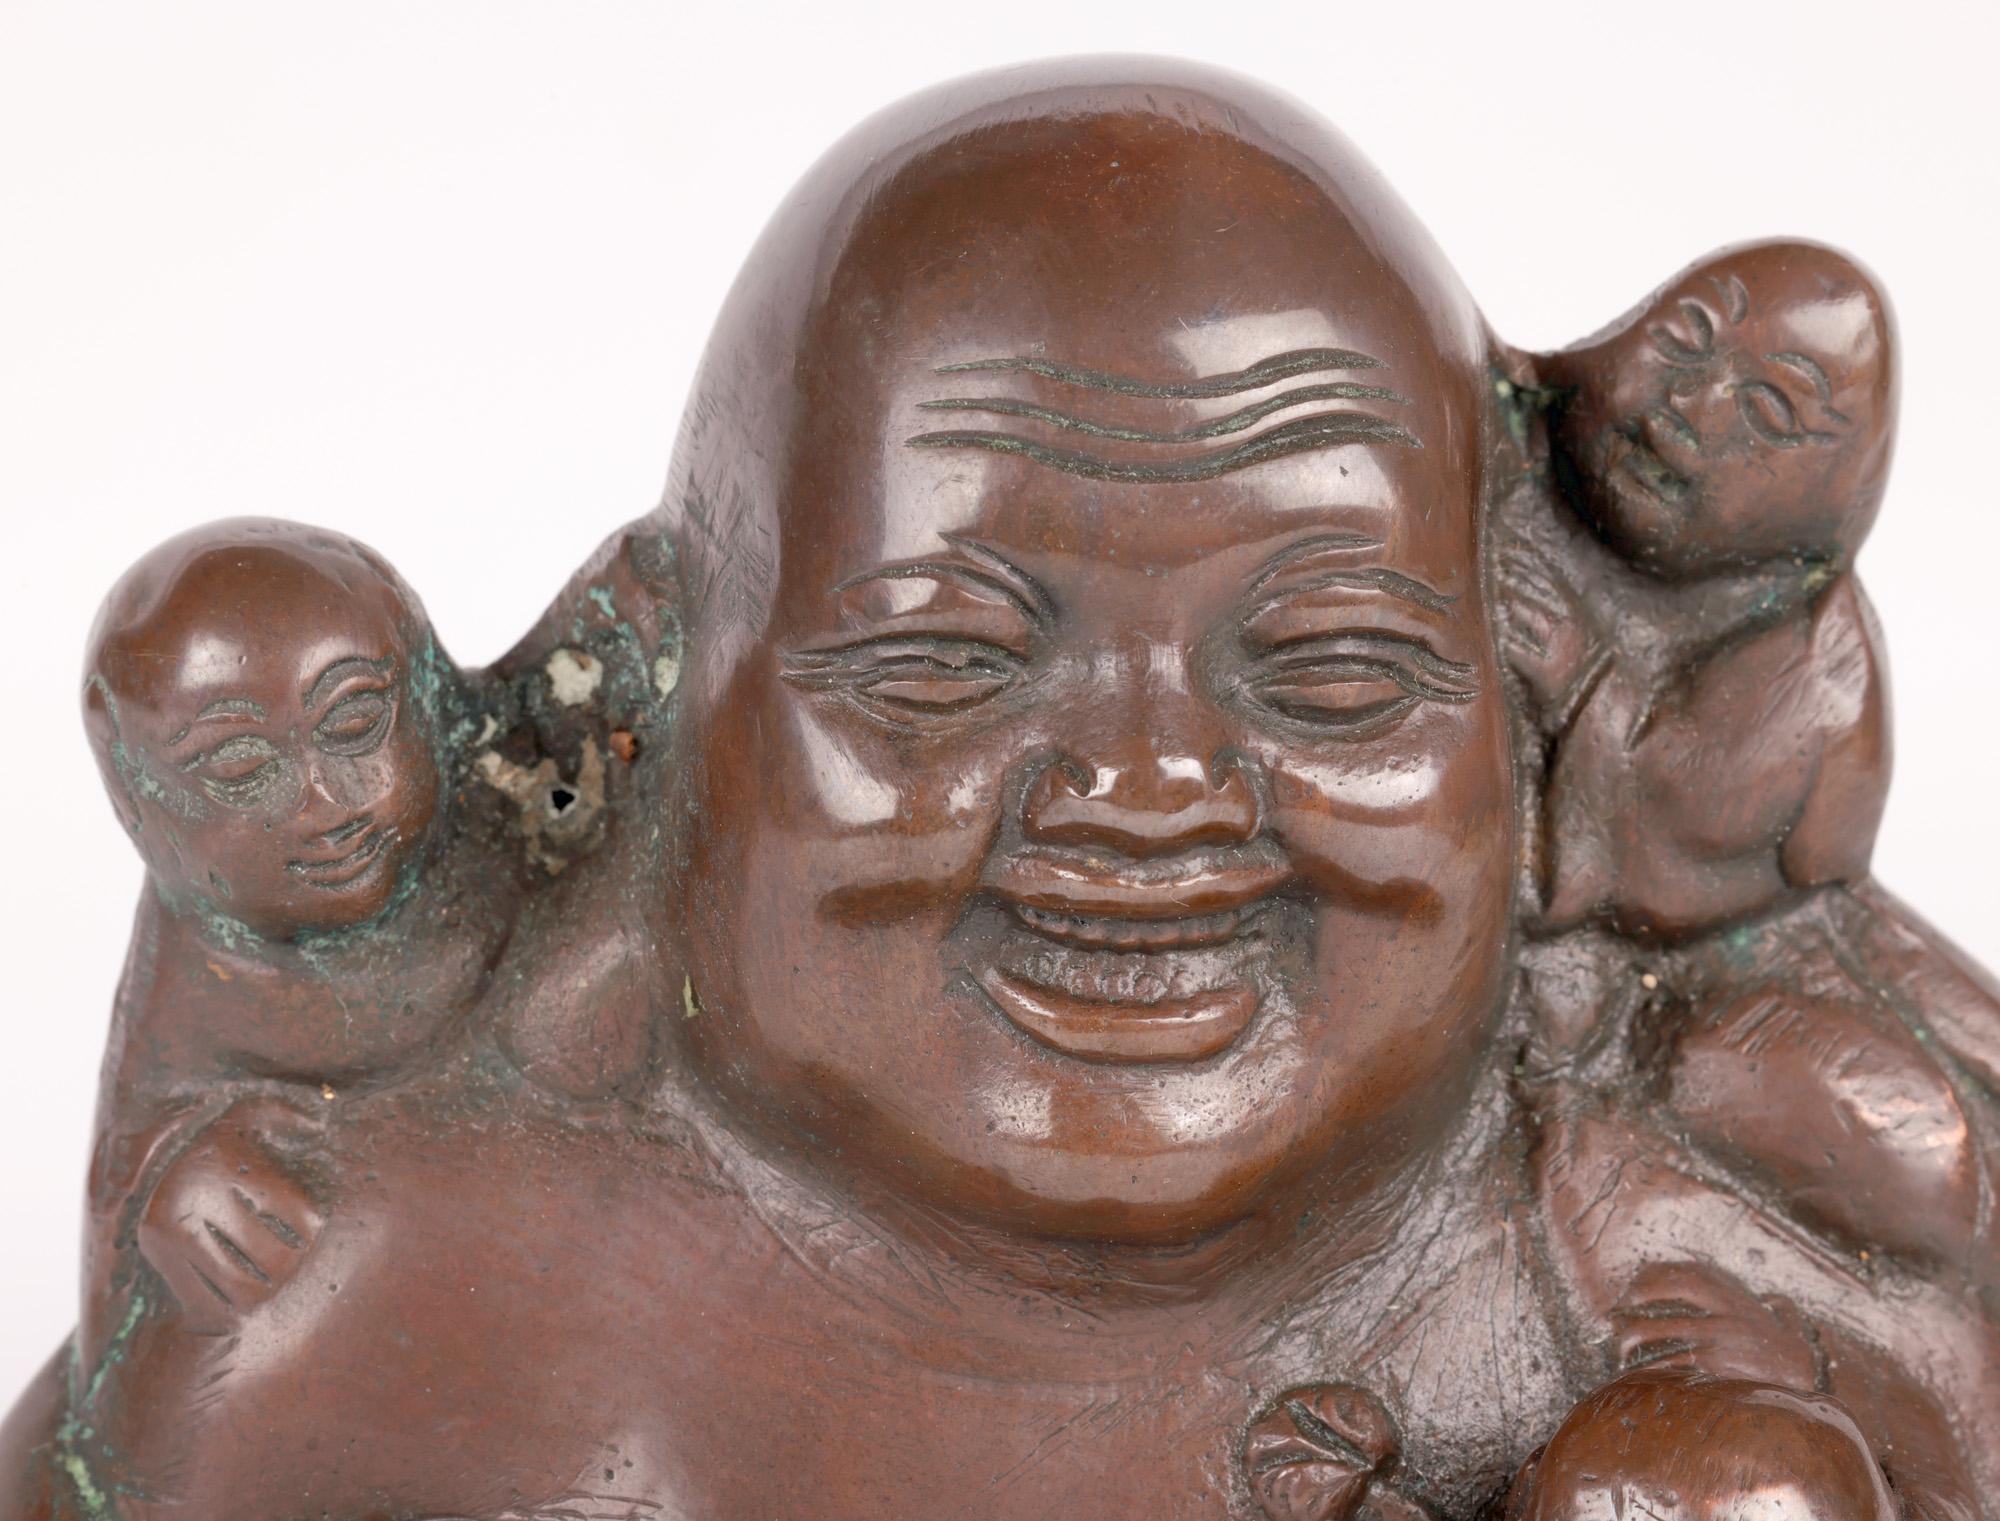 A fine Chinese bronzed copper seated Buddha with five small boys believed to date from the early 20th century. The hollow cast figure is well detailed and portrays the seated smiling Buddha with the open customary robe showing his large stomach and